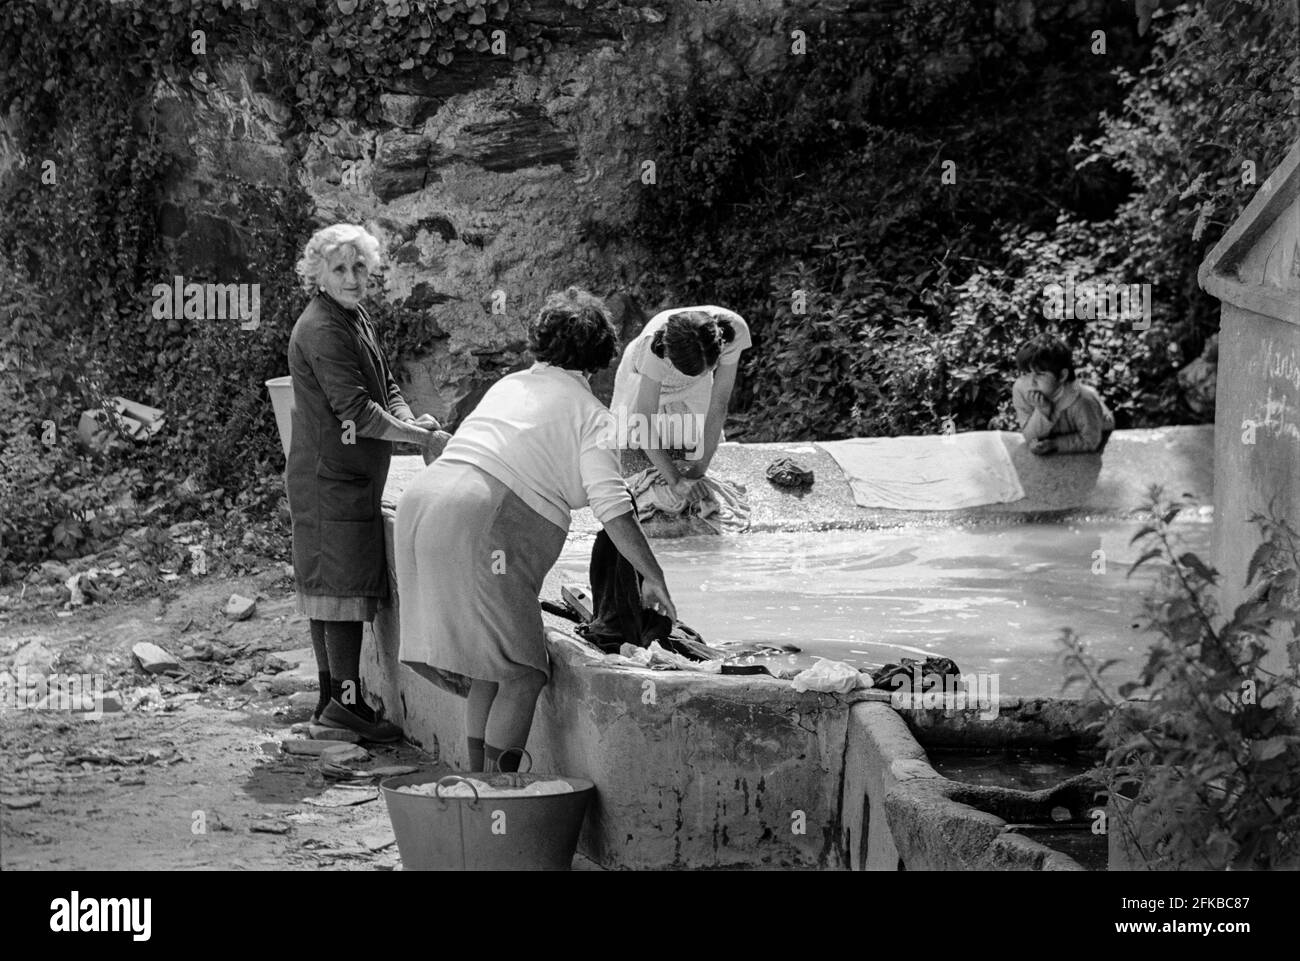 SPAIN - Galicia - 1970. Women washing clothes at the village spring and washing area in the village of Lorbe near A Coruña, Galicia, North west Spain. Stock Photo